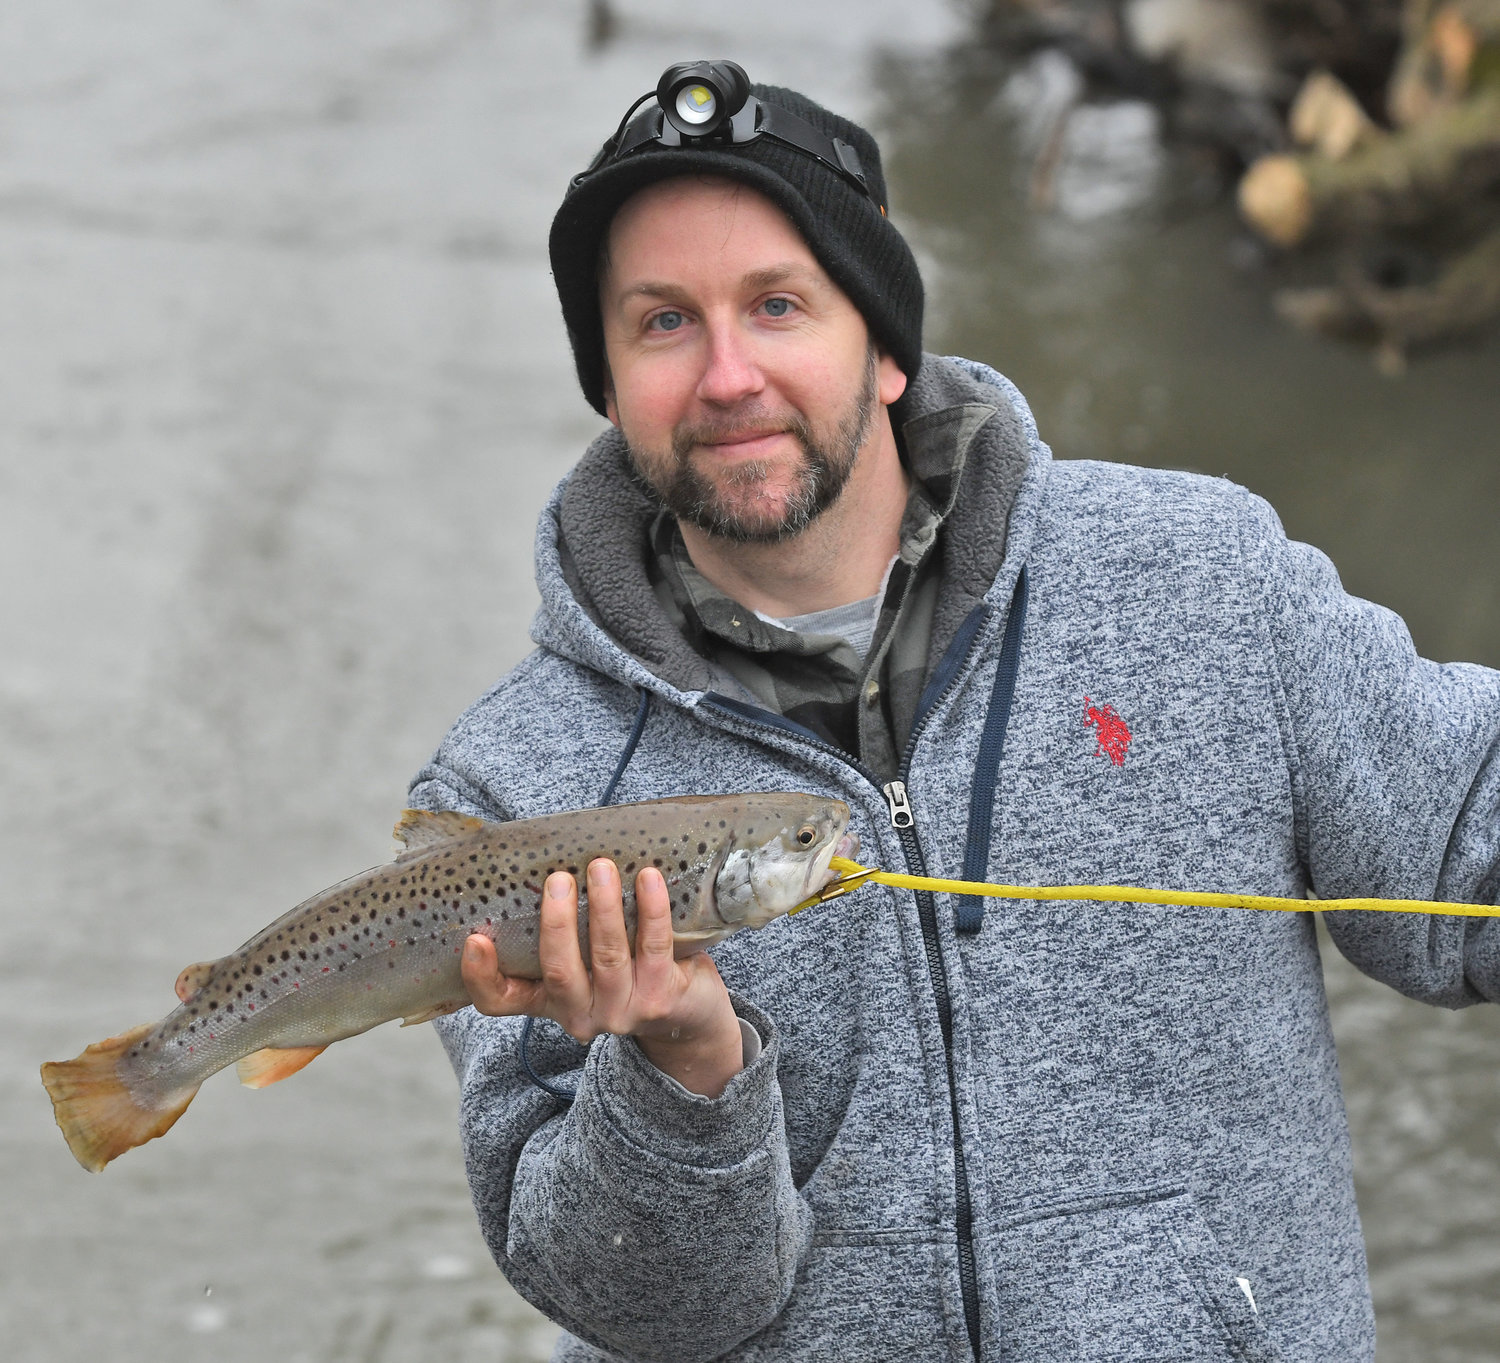 CATCH OF THE DAY — Casey Miner, of Rome, holds up an 18-inch brown trout he caught on the Mohawk River Friday next to the Rome Fish Hatchery. “Thanks to everyone there for making small moments more memorable,” he said.